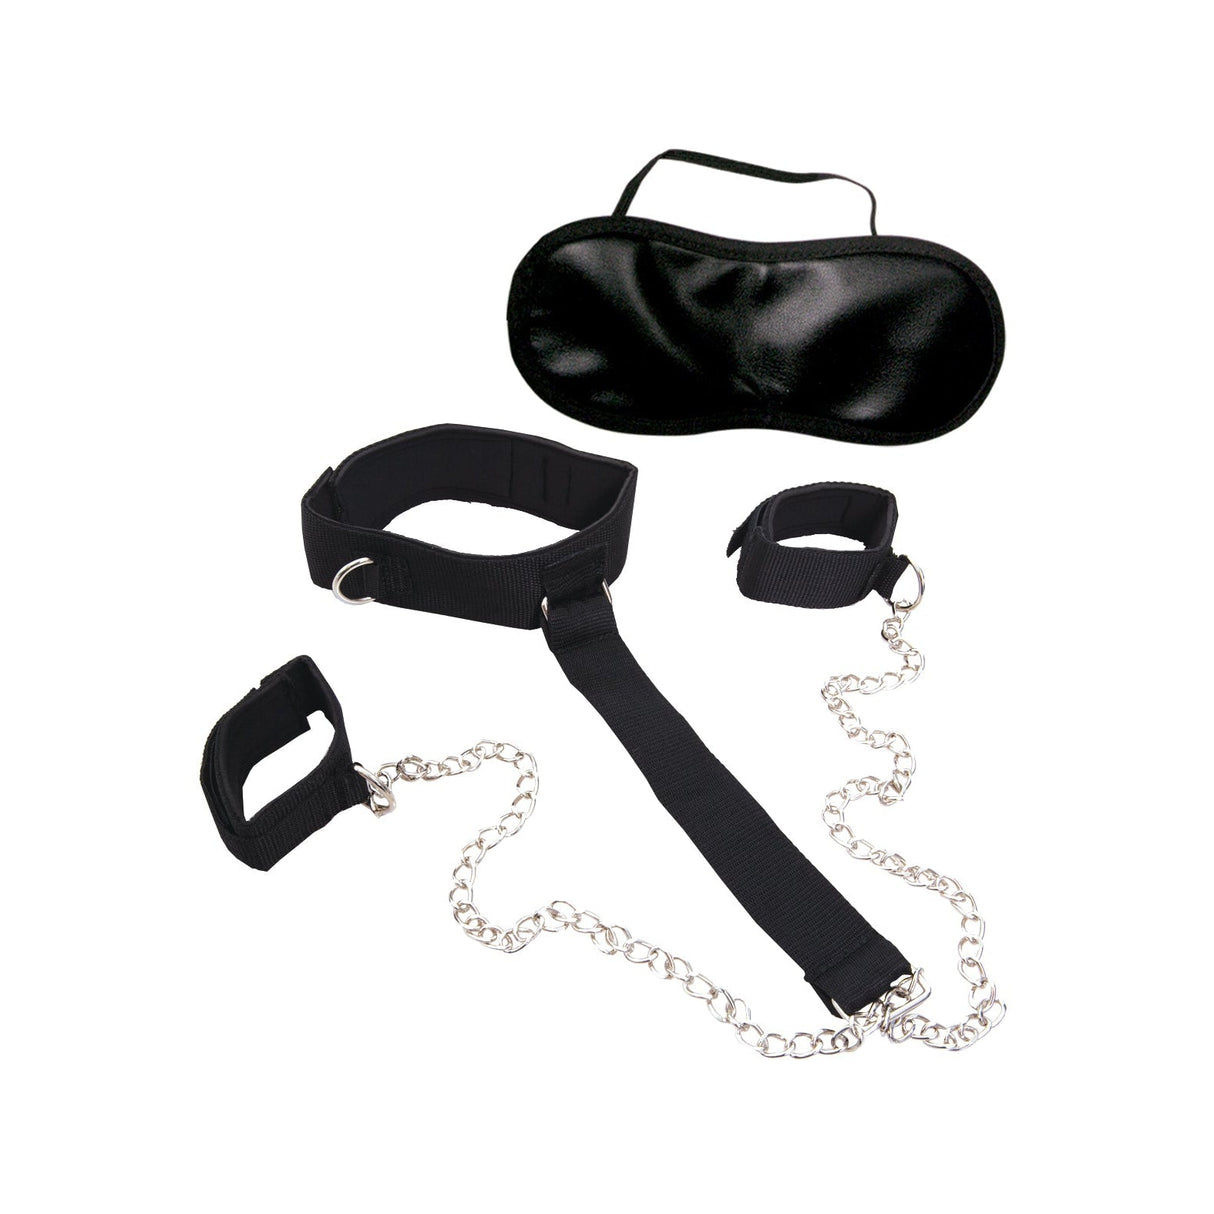 Dominant Submissive Collection 2 Cuffs and Collar Set